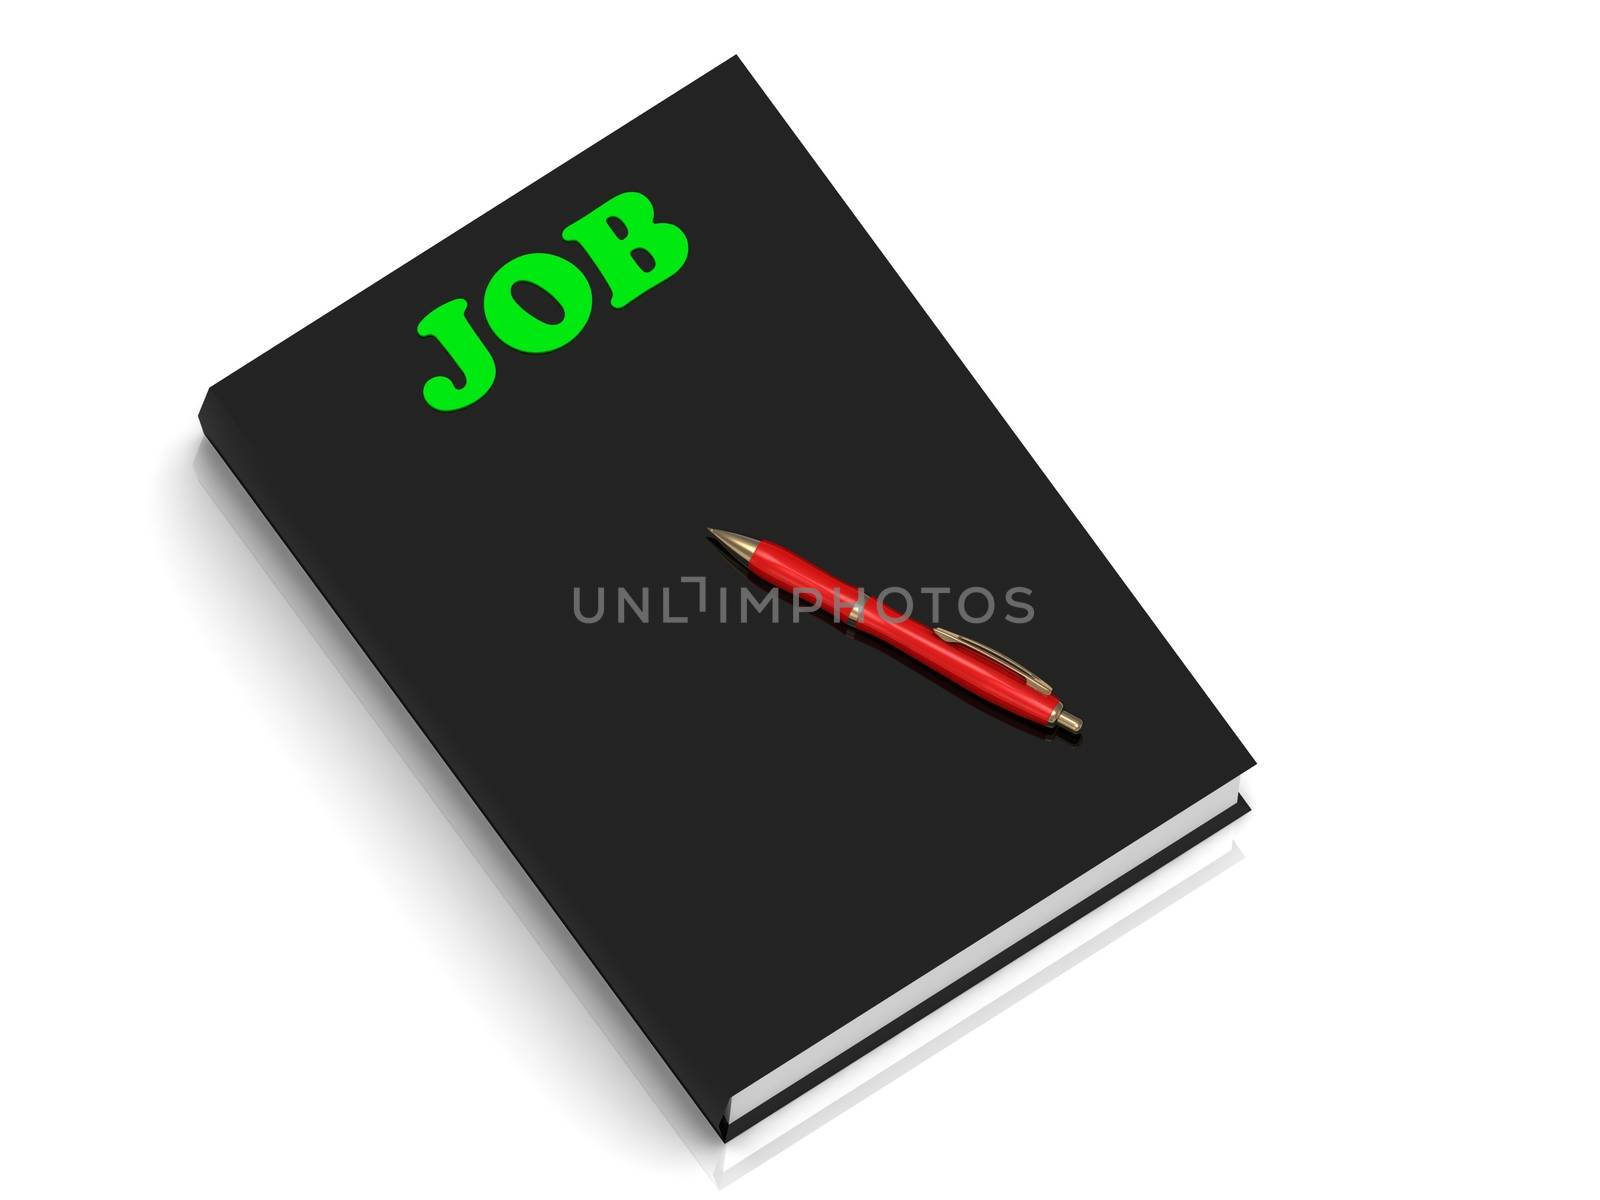 JOB- inscription of green letters on black book on white background